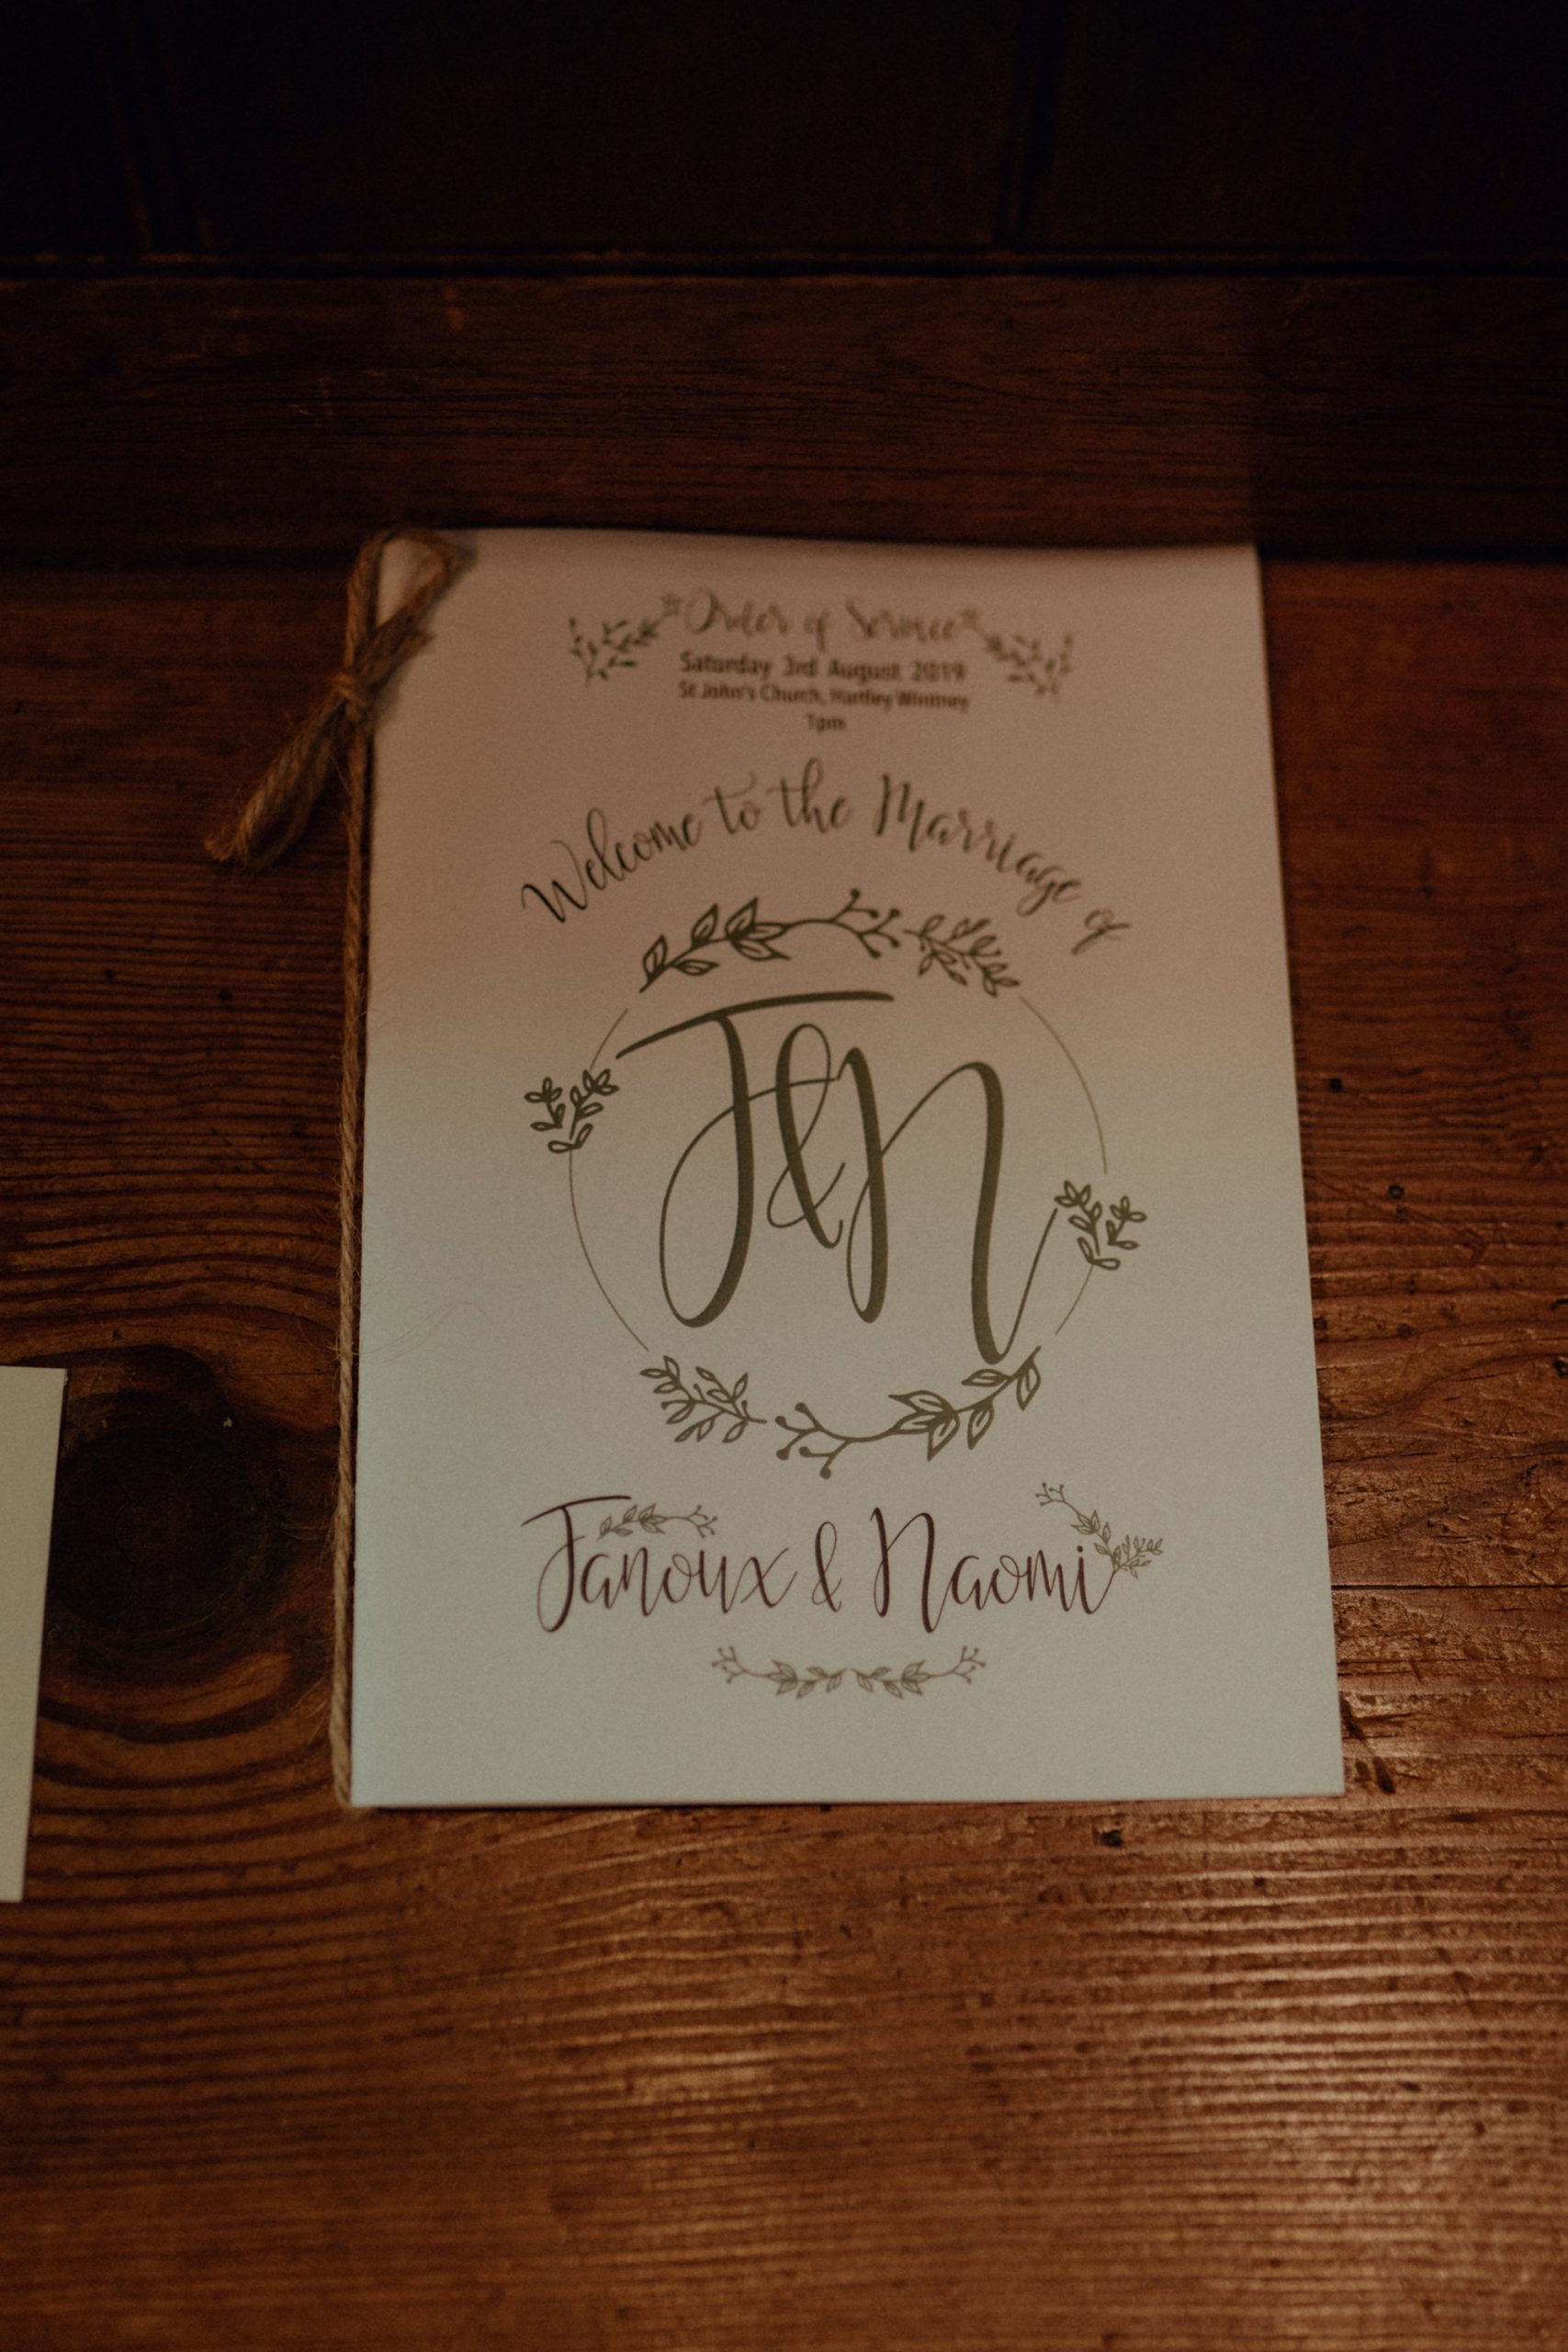 Naomi Janoux Rustic Festival Wedding Belle Art Photography SBS 005 scaled